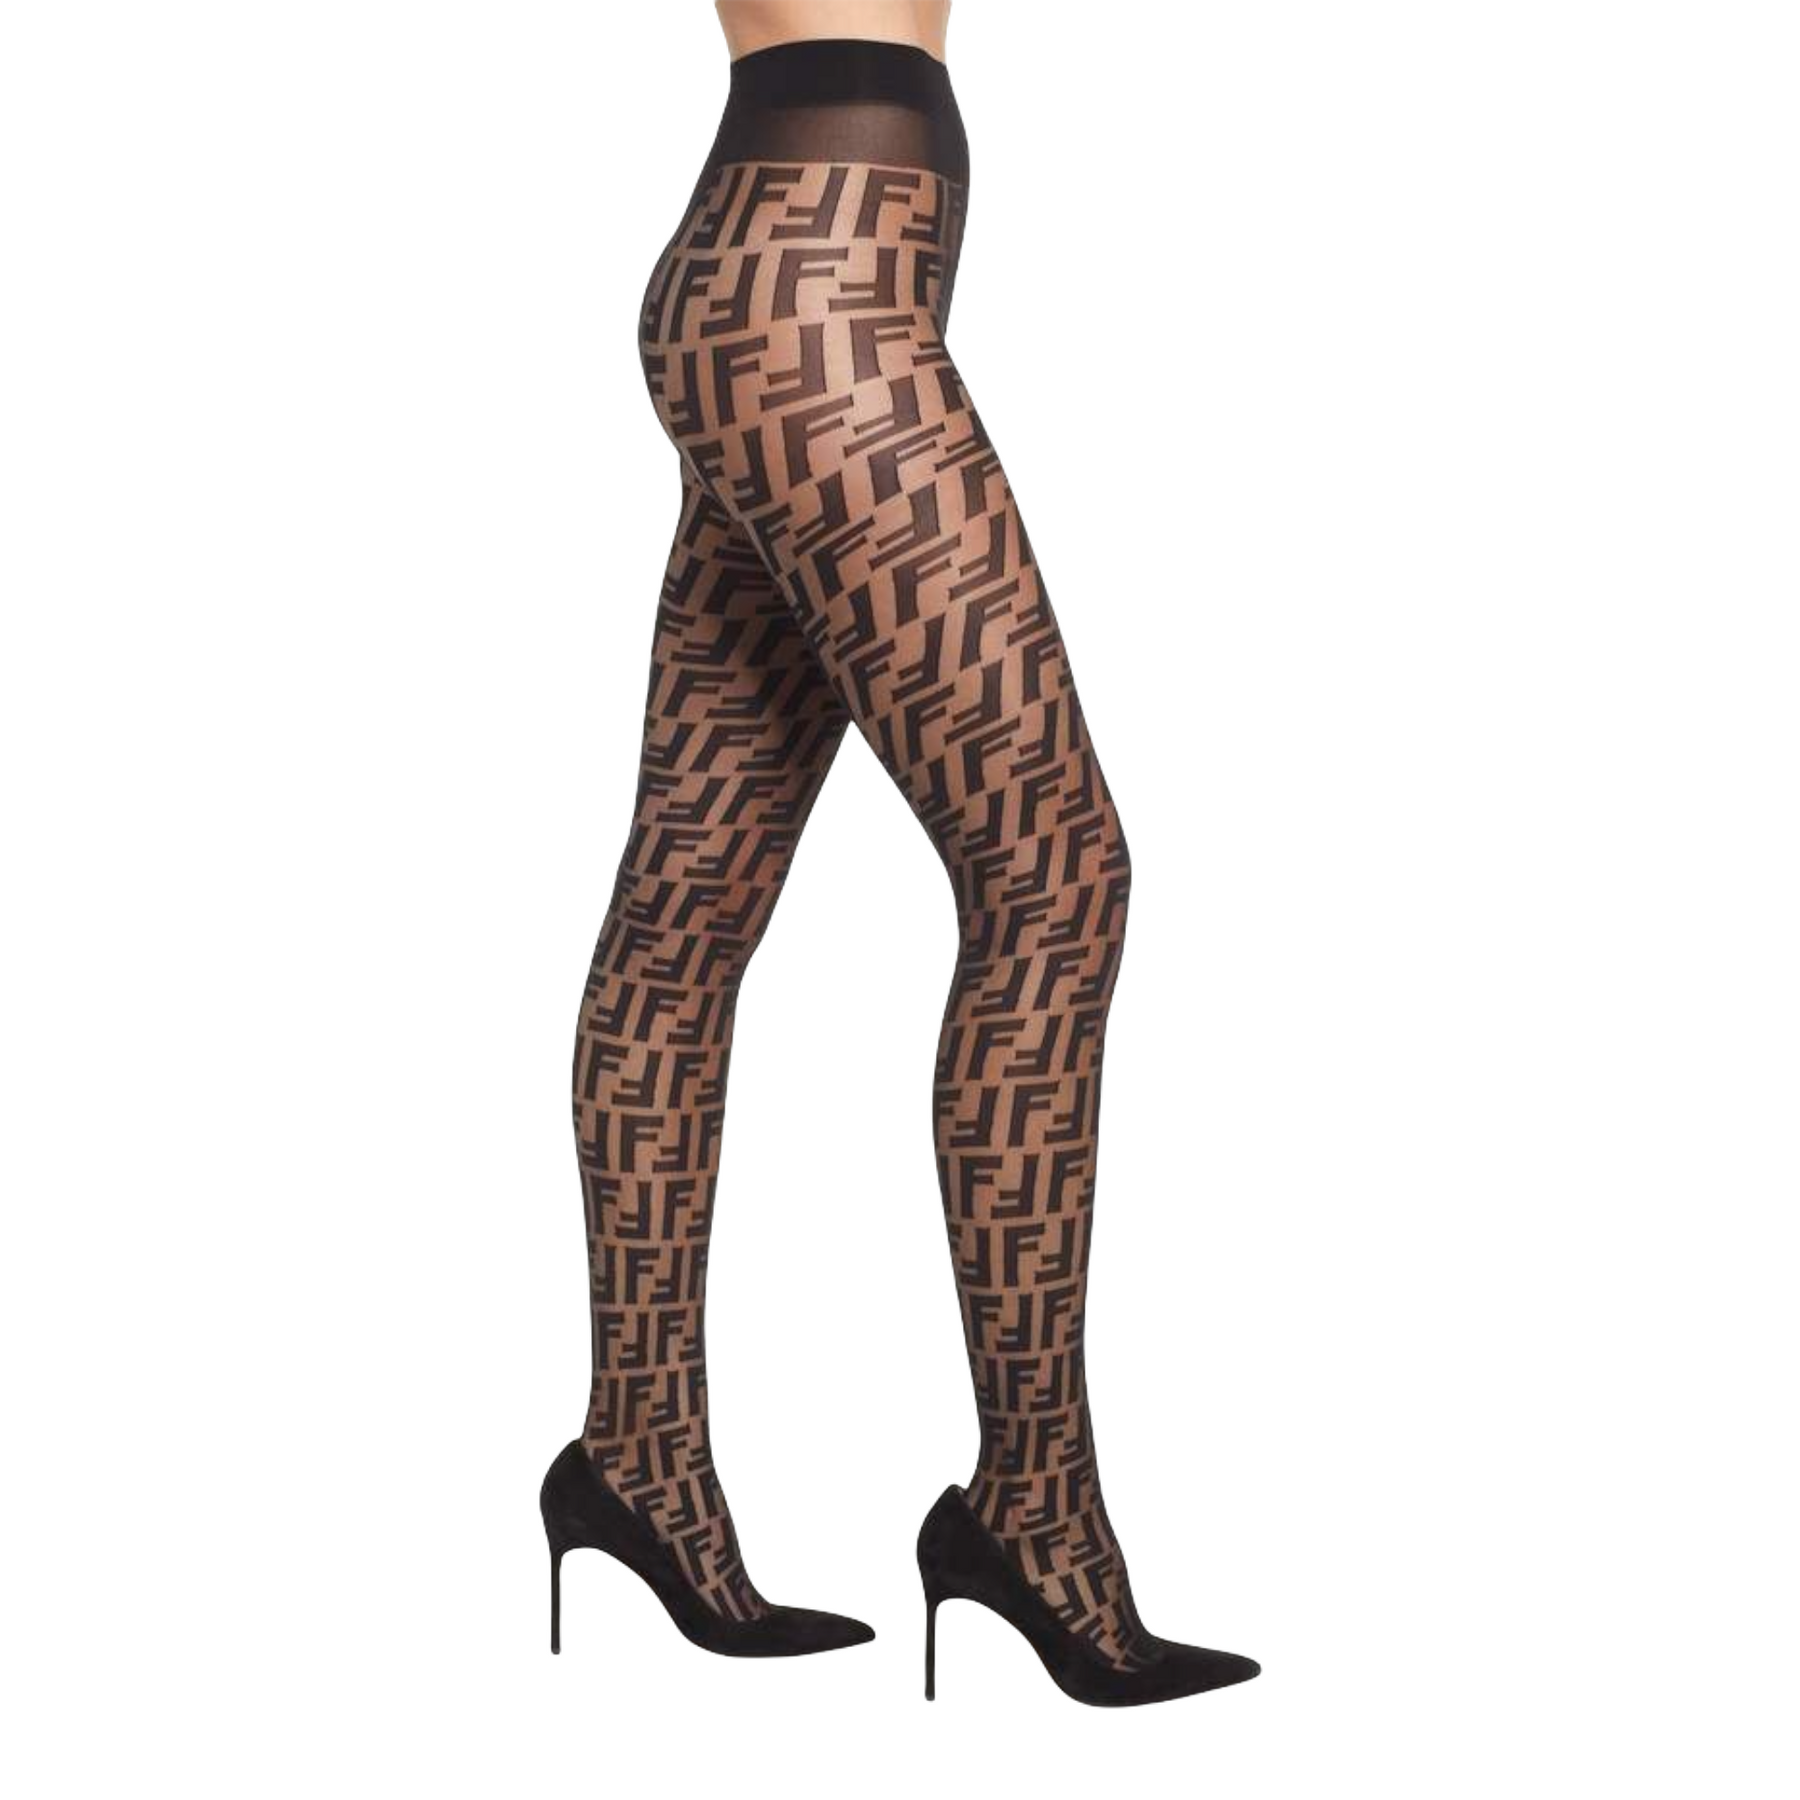 FF Inspired Tights - Black – Dropashoe